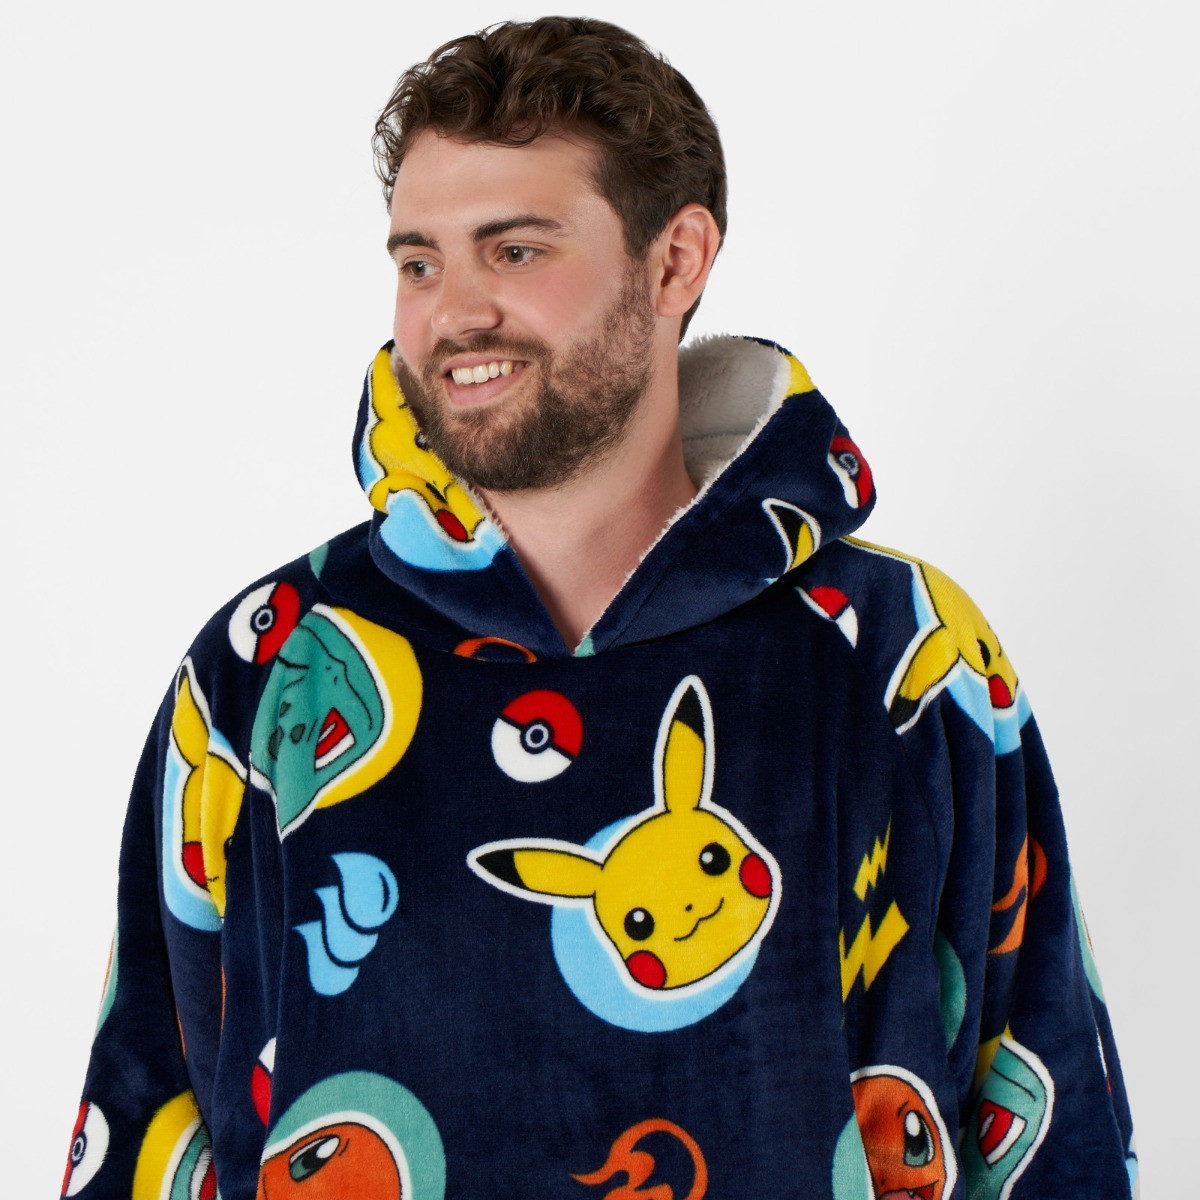 OHS Pokémon Icons Hoodie Blanket, Blue - Adults>